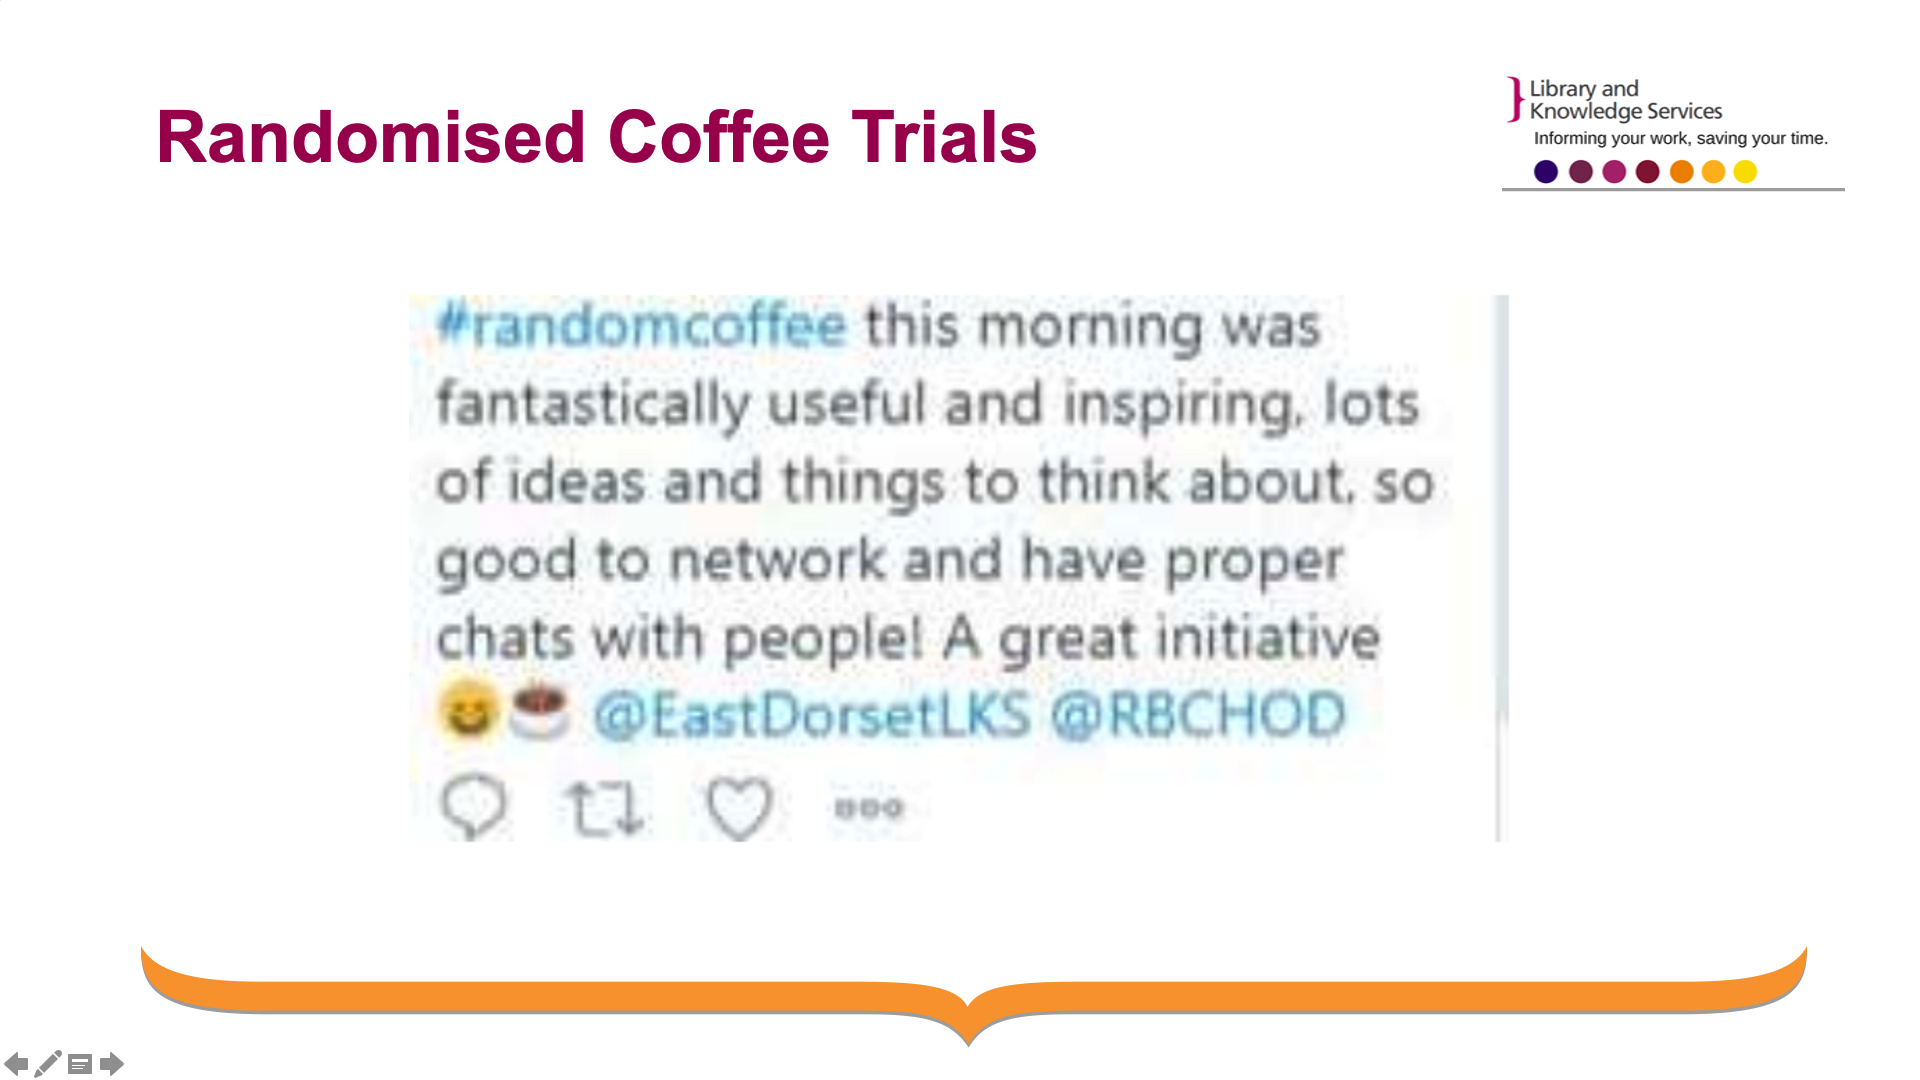 Title: Randomised Coffee Trials. Image on page is a screenshot of a tweet saying: 